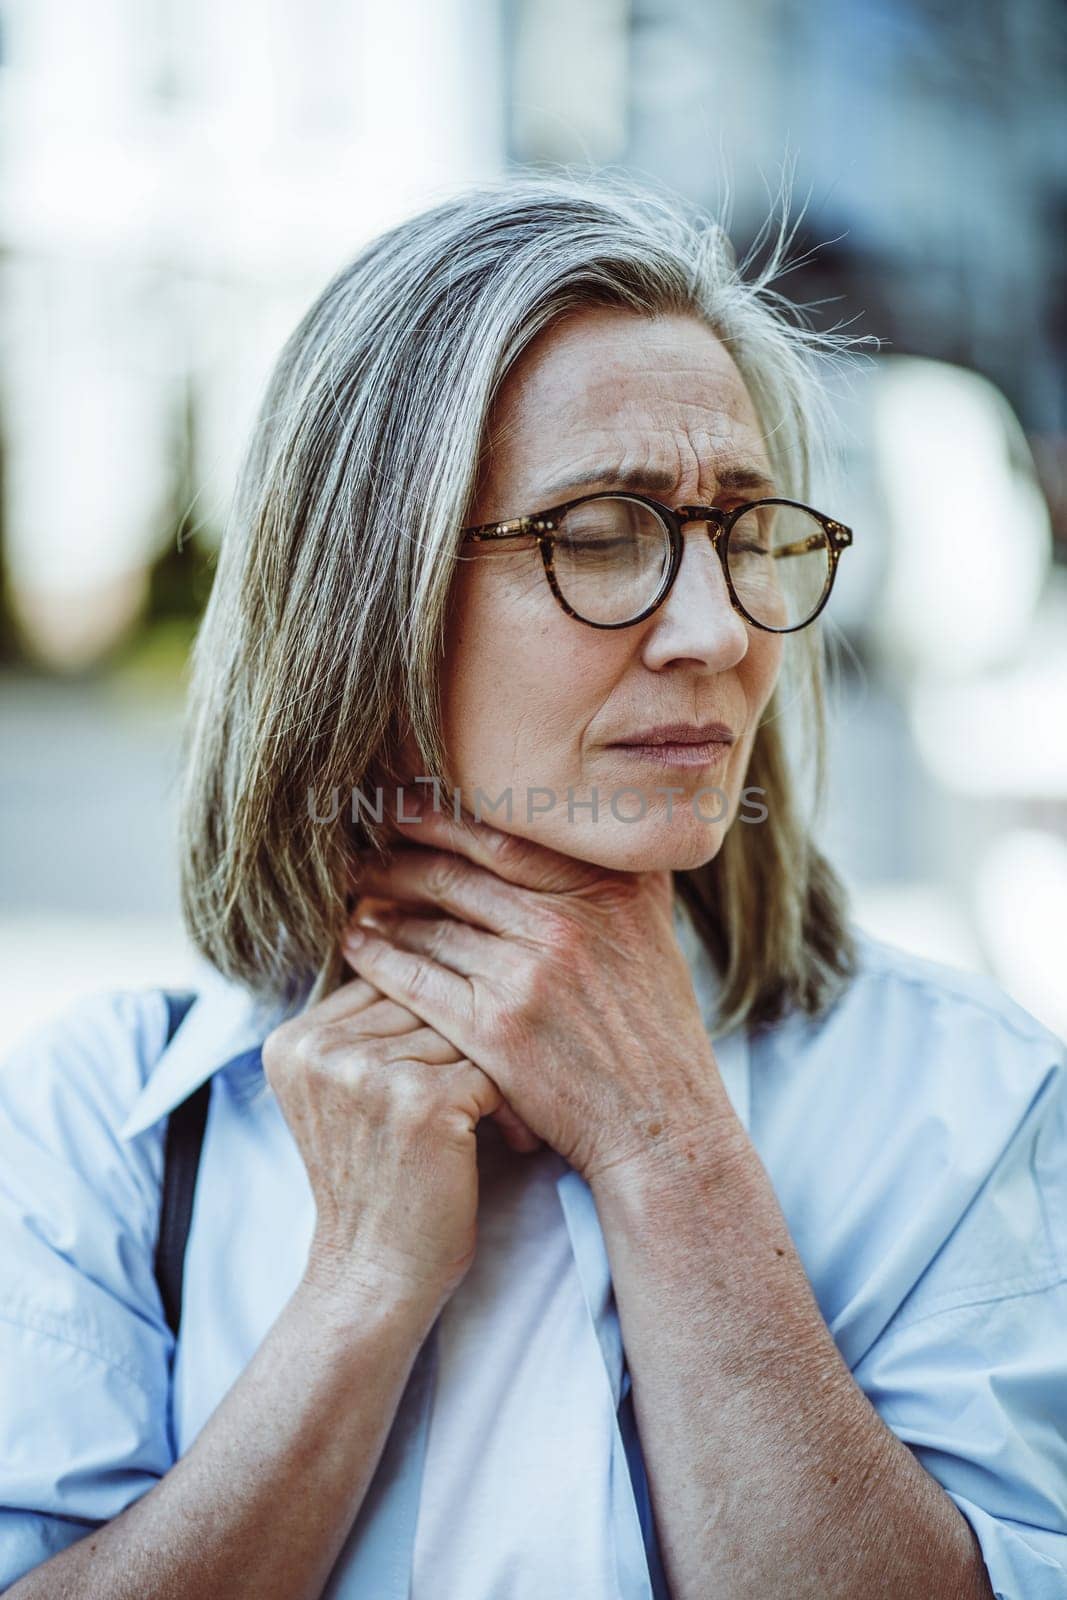 Concept of sickness through mature lady holding throat. Woman appears sick and tired, with weary expression on face. Cold toned color palette, adding to overall sense of illness and discomfort. . High quality photo